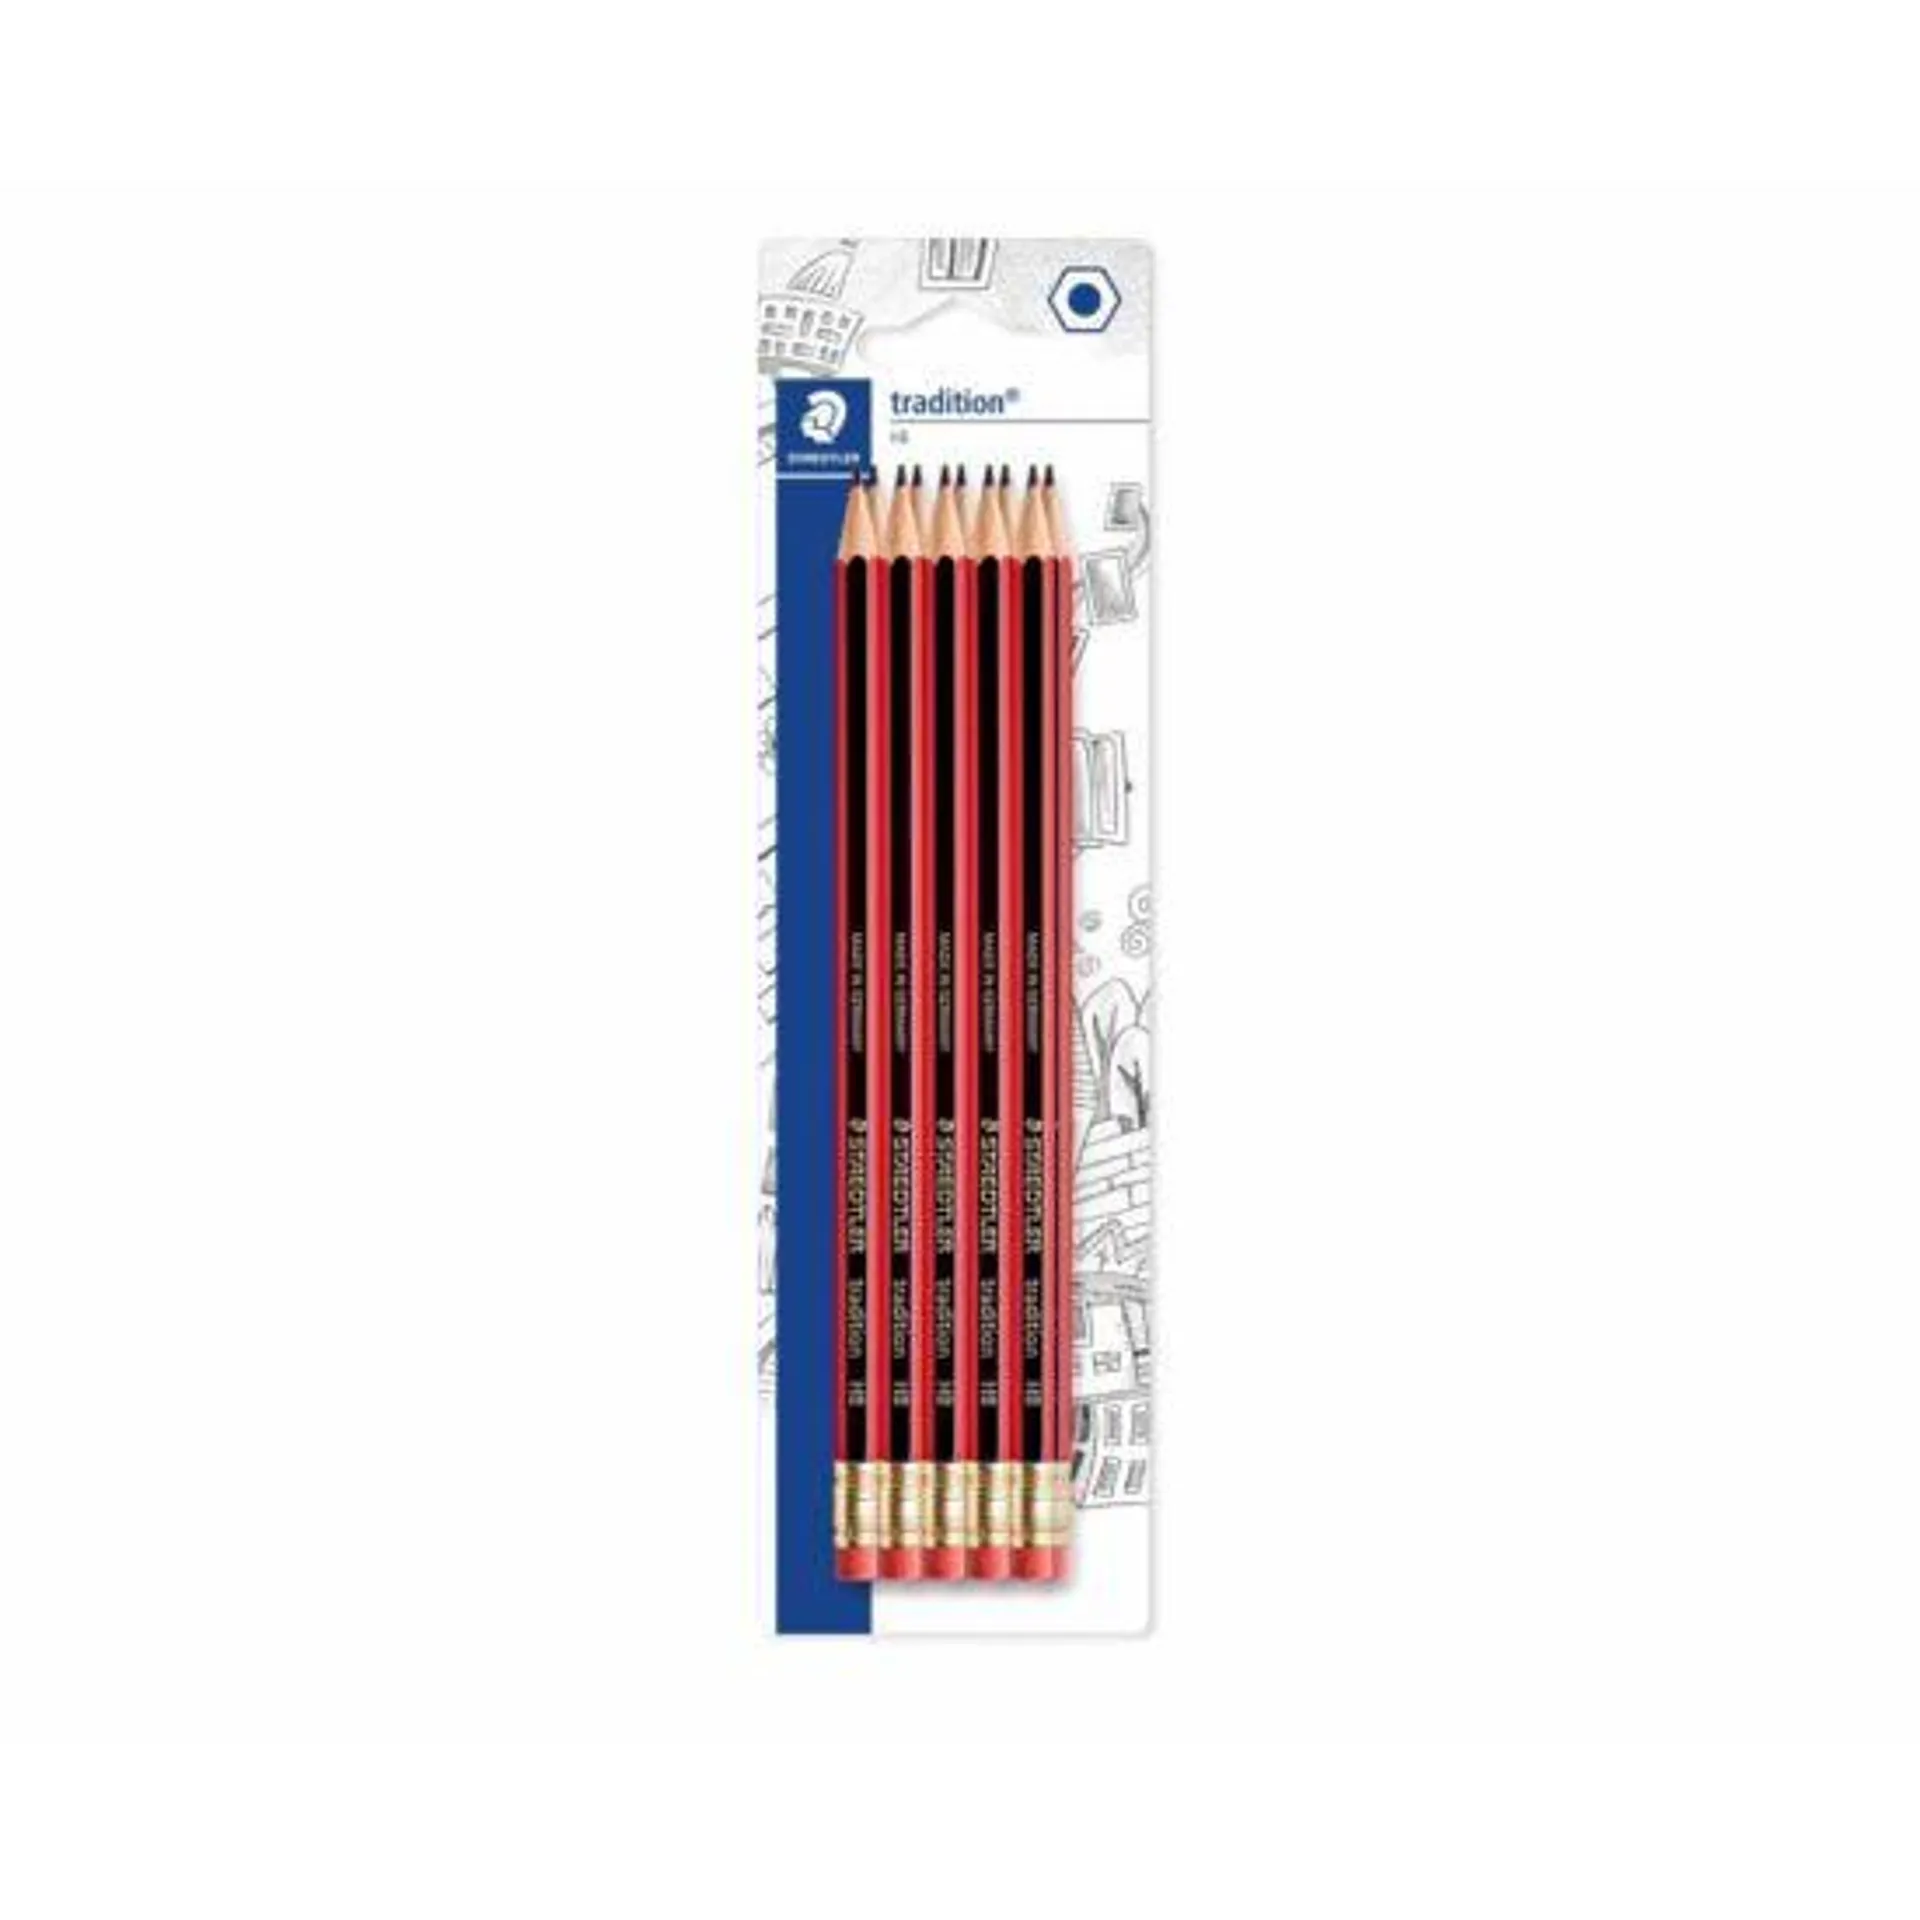 Staedtler Traditional Pencil HB Pack of 10 with Eraser